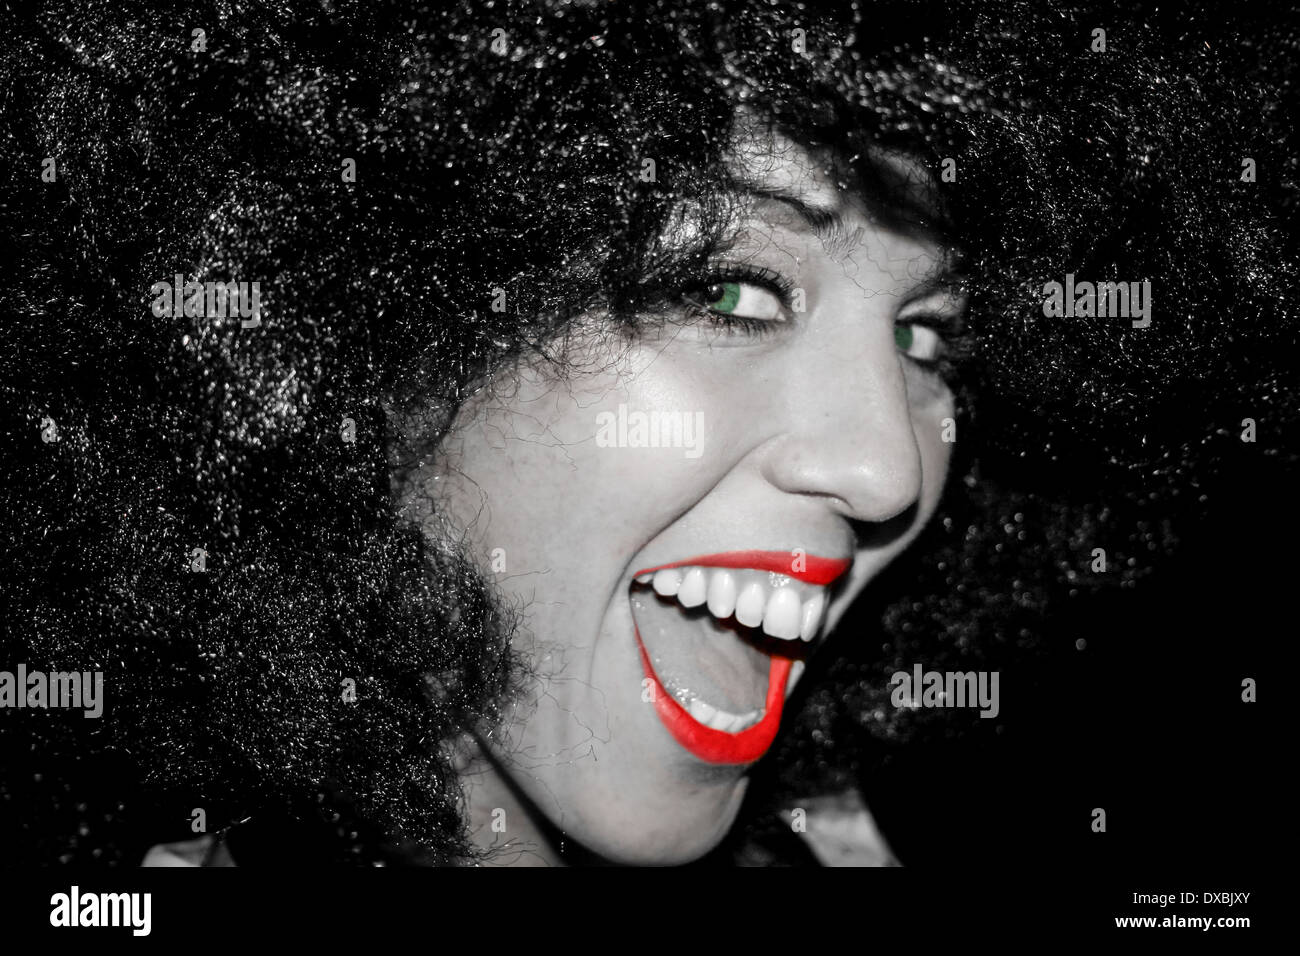 Attractive young woman wearing black wig and laughing directly into the camera. Stock Photo